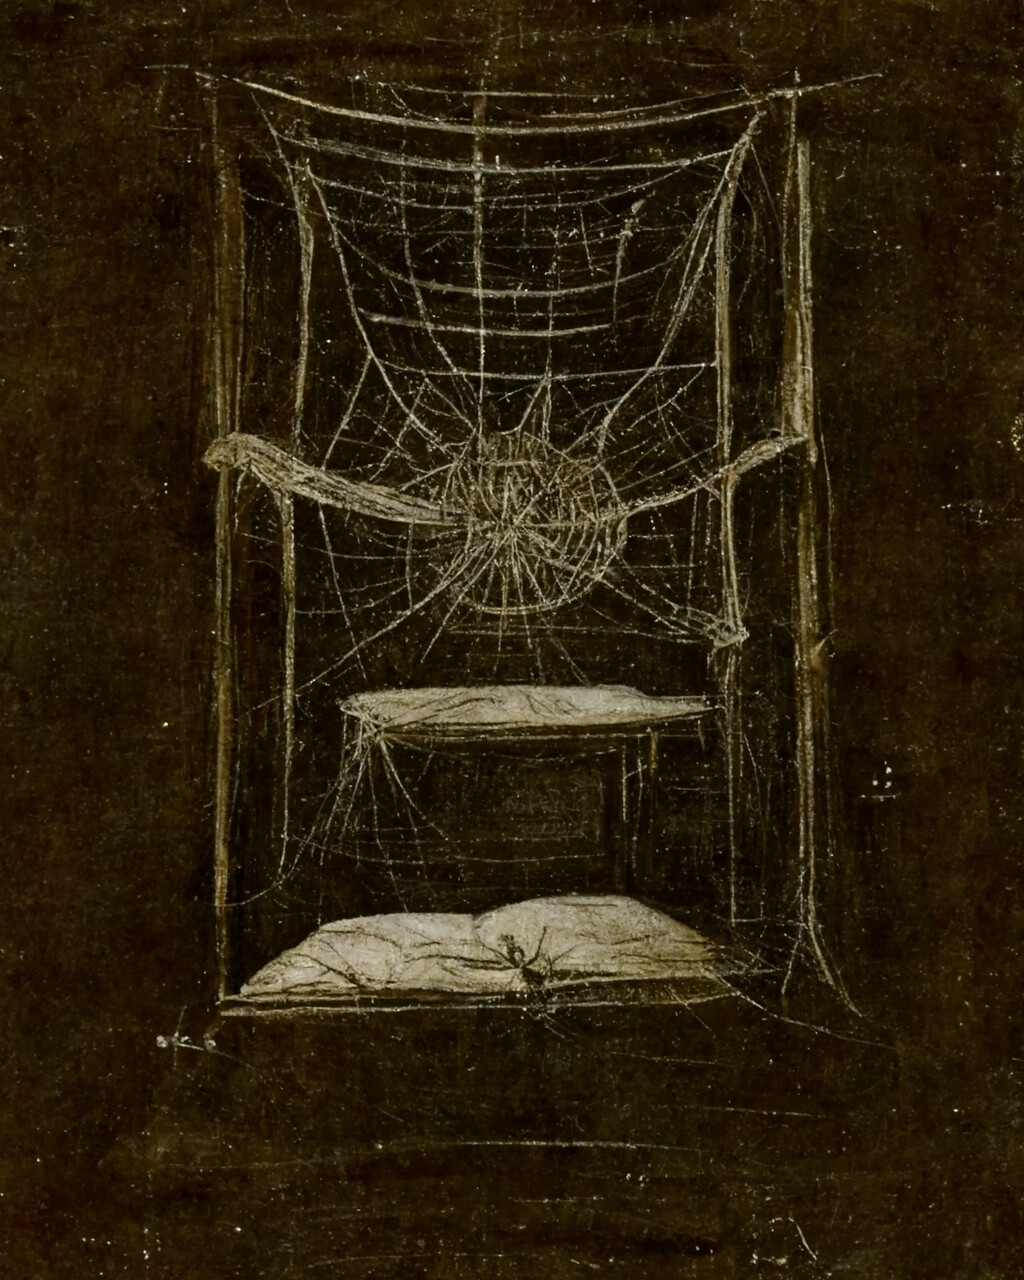 "This morning I awoke and saw a spider web. It was not there when I laid down. My room is clean. There is no spider. I counted the web. Each count though, was wrong. First fourty, then thirty, then fifteen, then five. The web shrank as I counted."